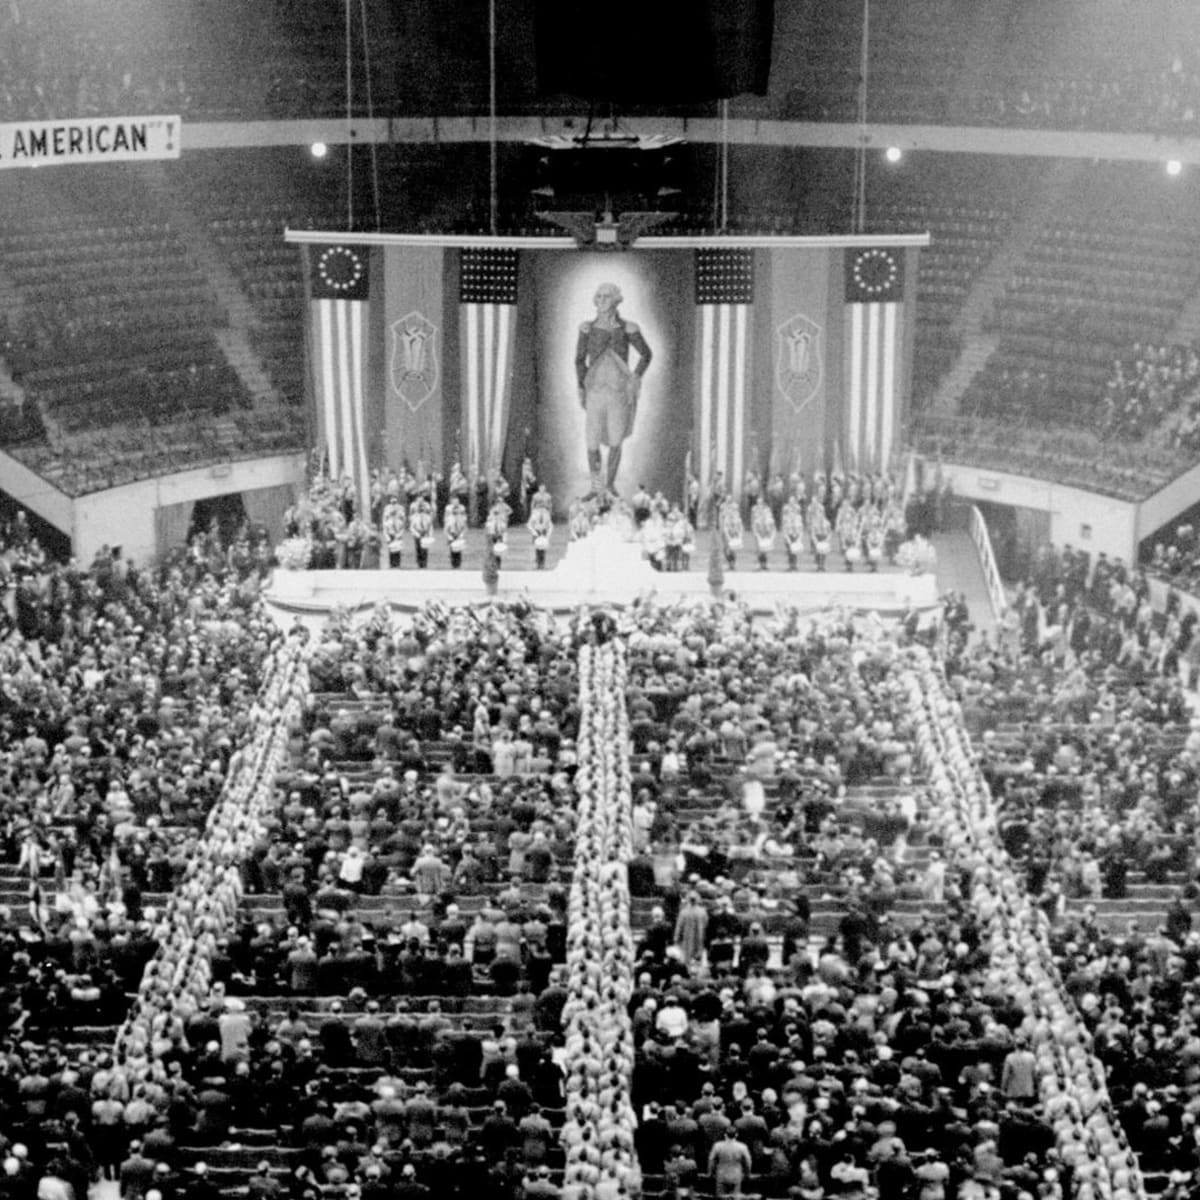 In 1939, a peculiar crowd of 10.000 gathered in Madison Square Garden. The meeting called itself "pro American", but the banners draping the stage sent a different message. Let's zoom in.  #history  #ww2